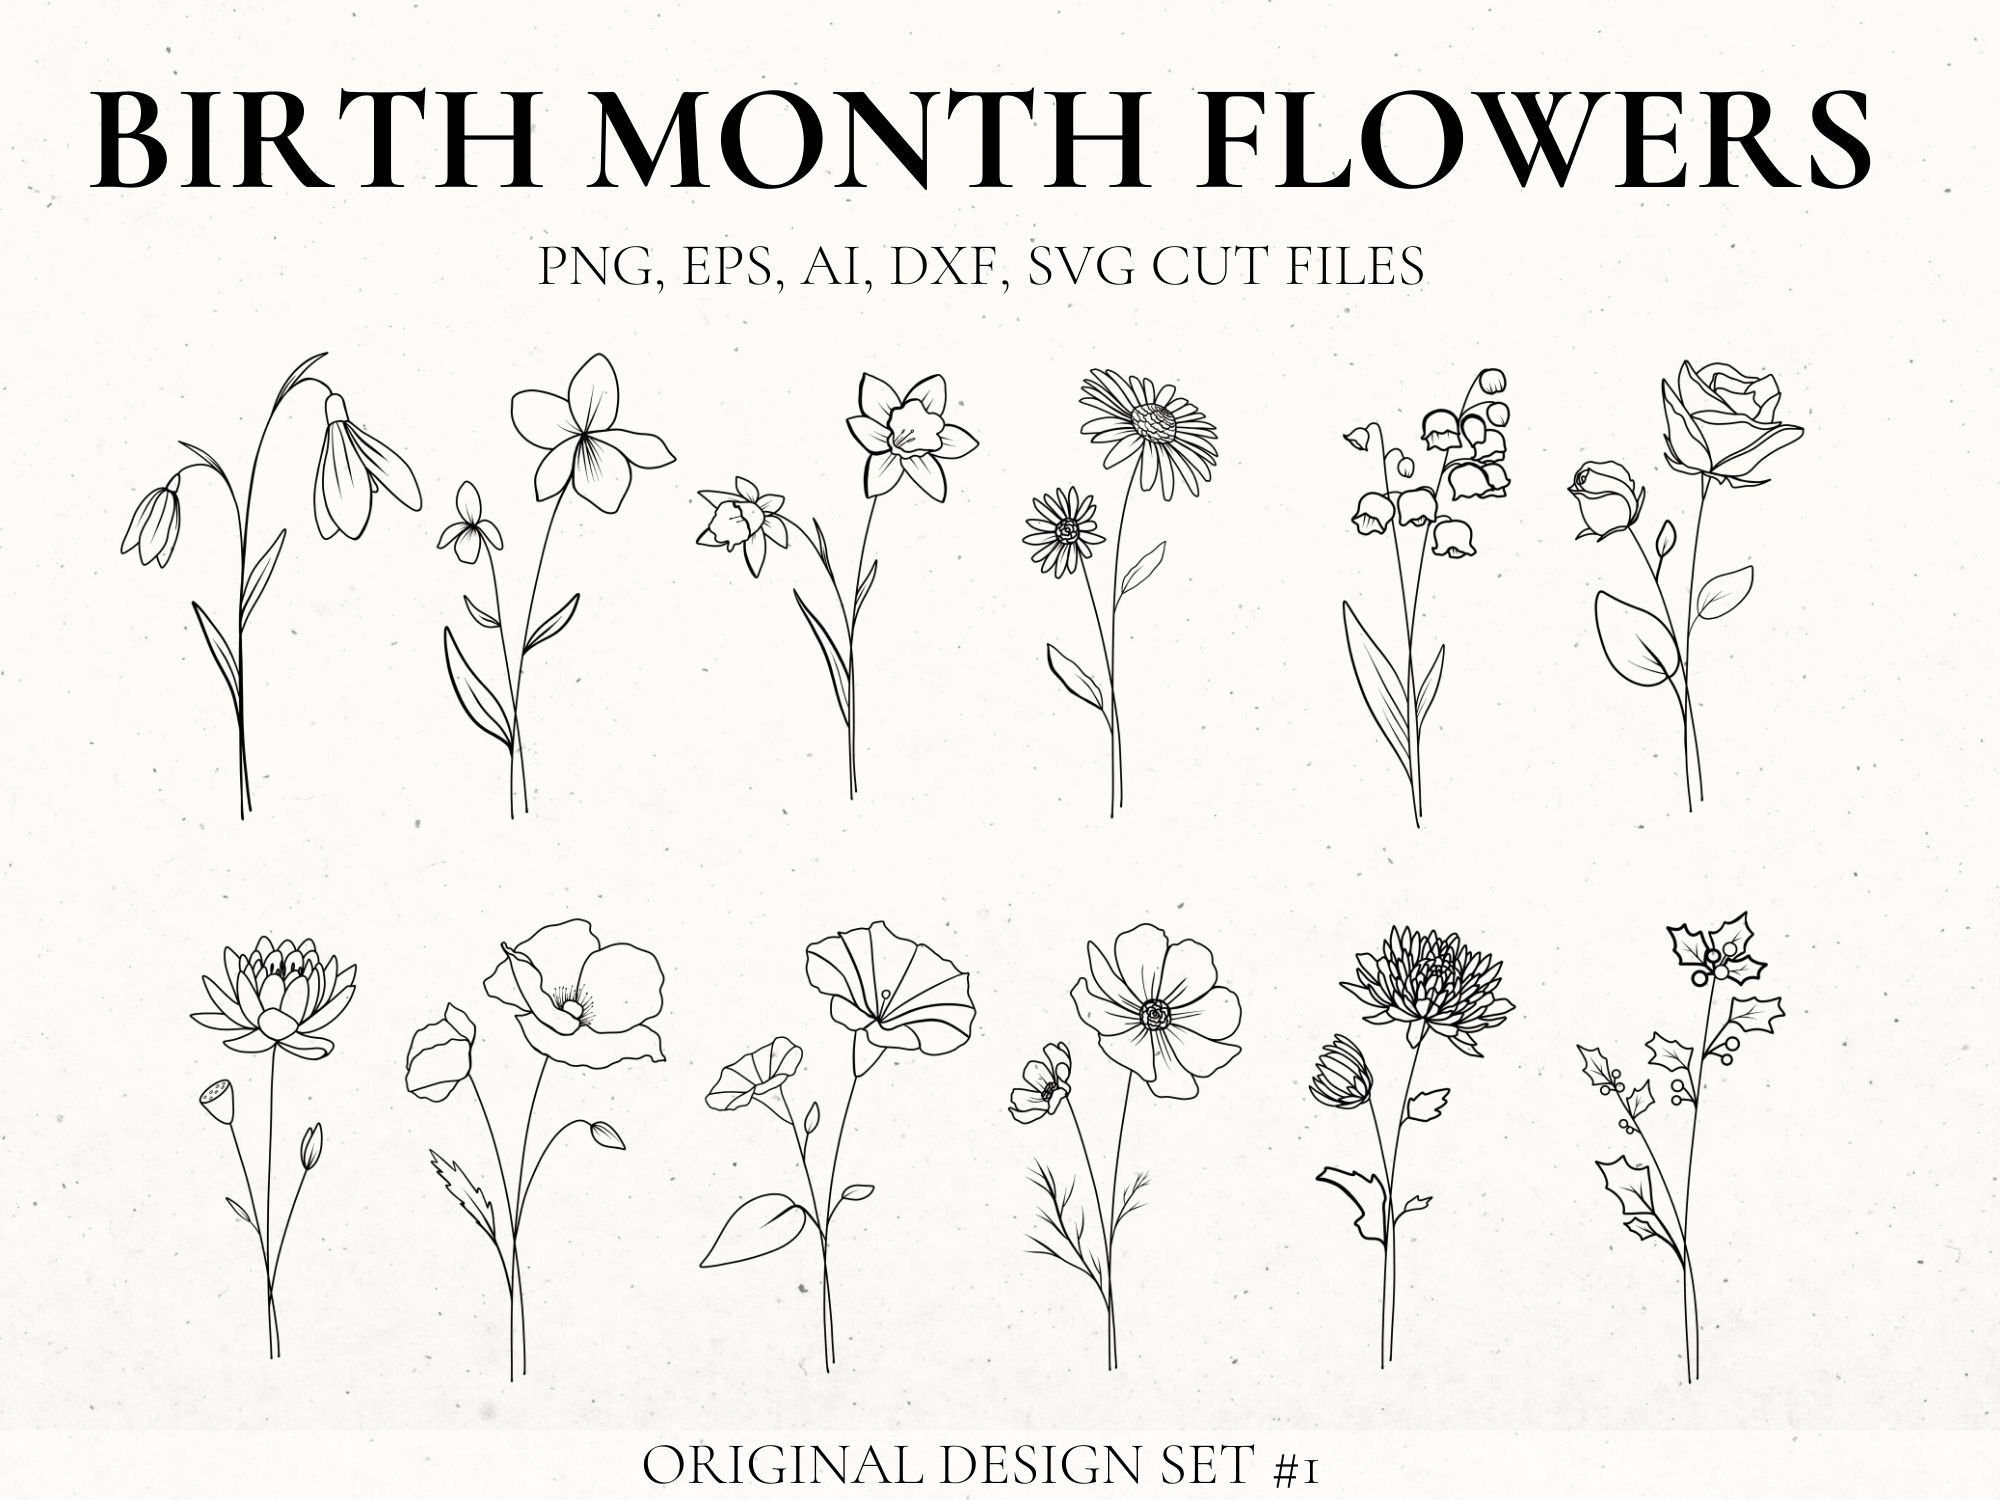 Line Drawings Of Birth Month Flowers Image To U